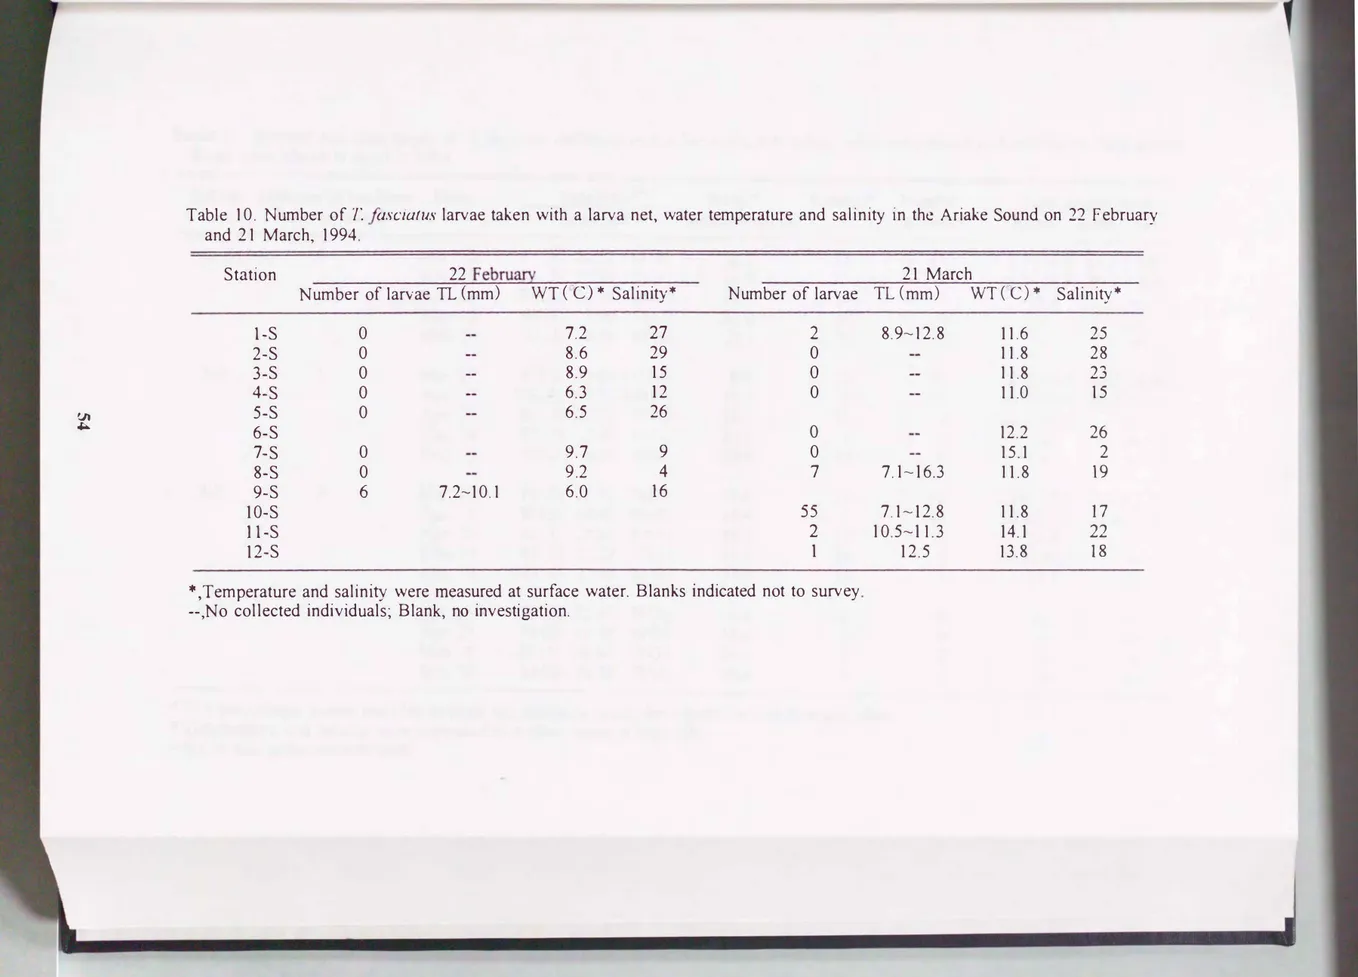 Table  10.  Number  of  1:ωciatus  larvae  taken  with  a  larva  net，  water  temperature  and  salinity  in  the  Ariake  Sound  on  22  F  ebruary  and  21  March，  1994 